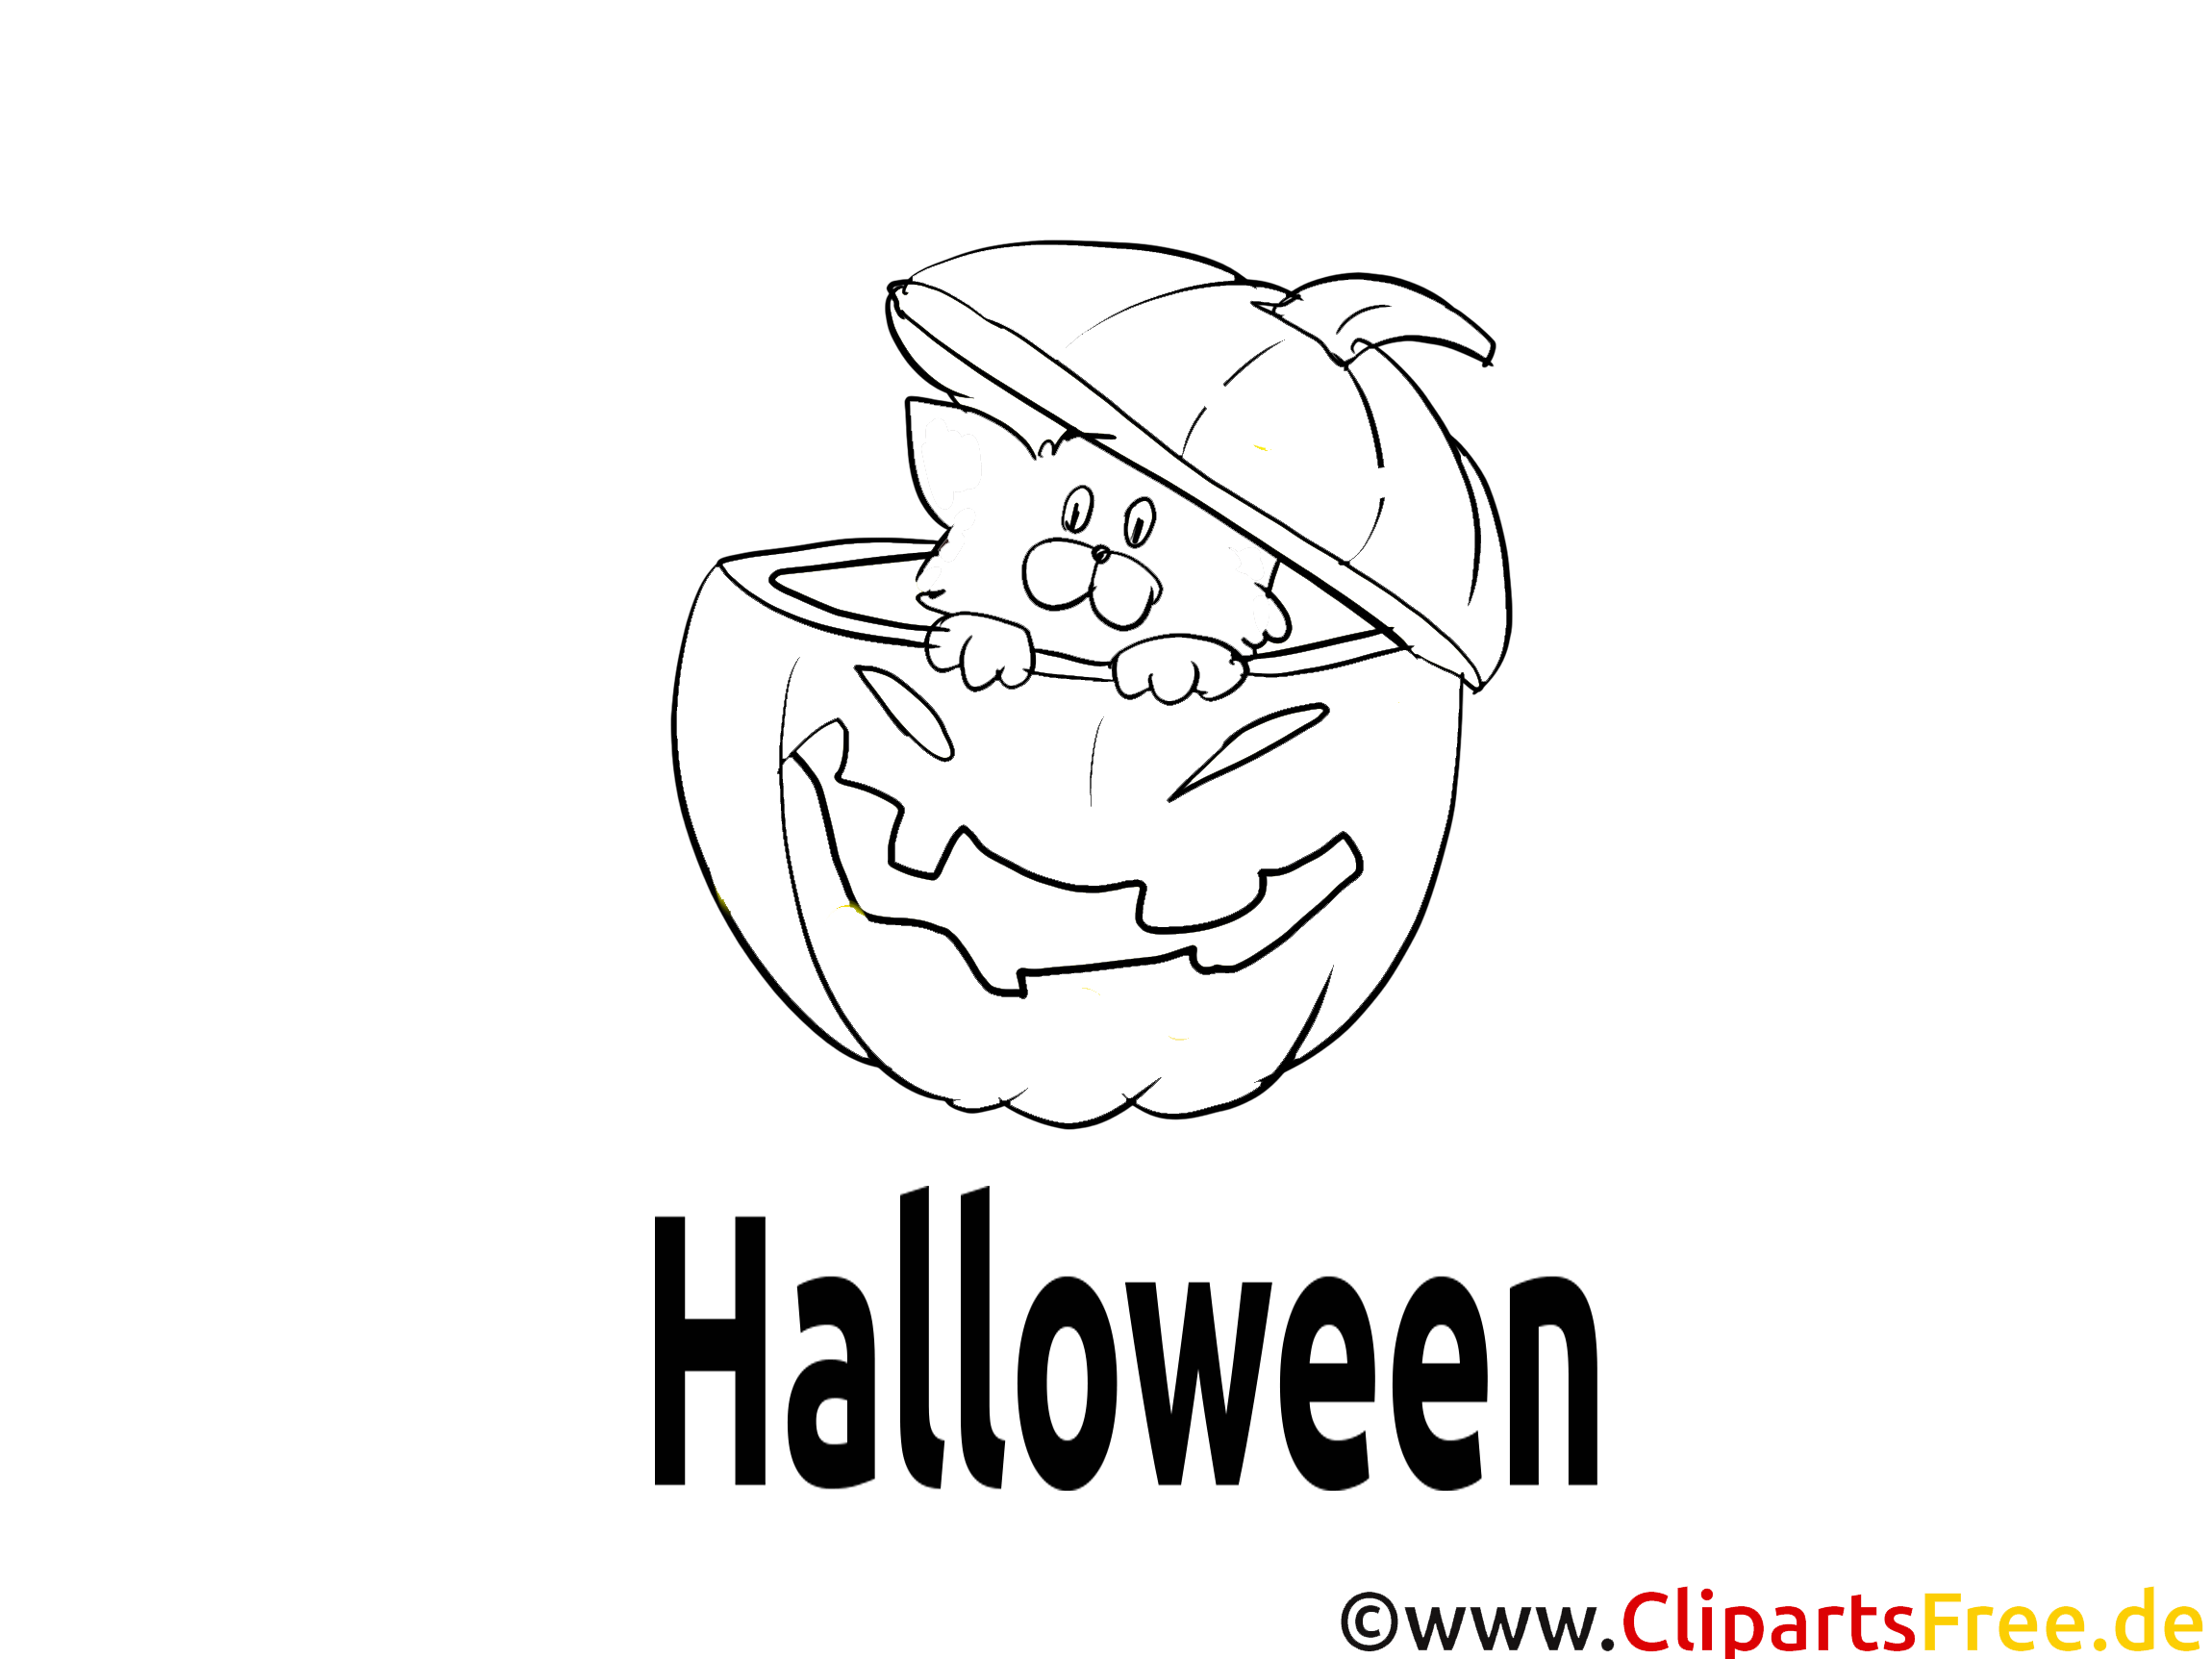 Courge image – Coloriage halloween illustration